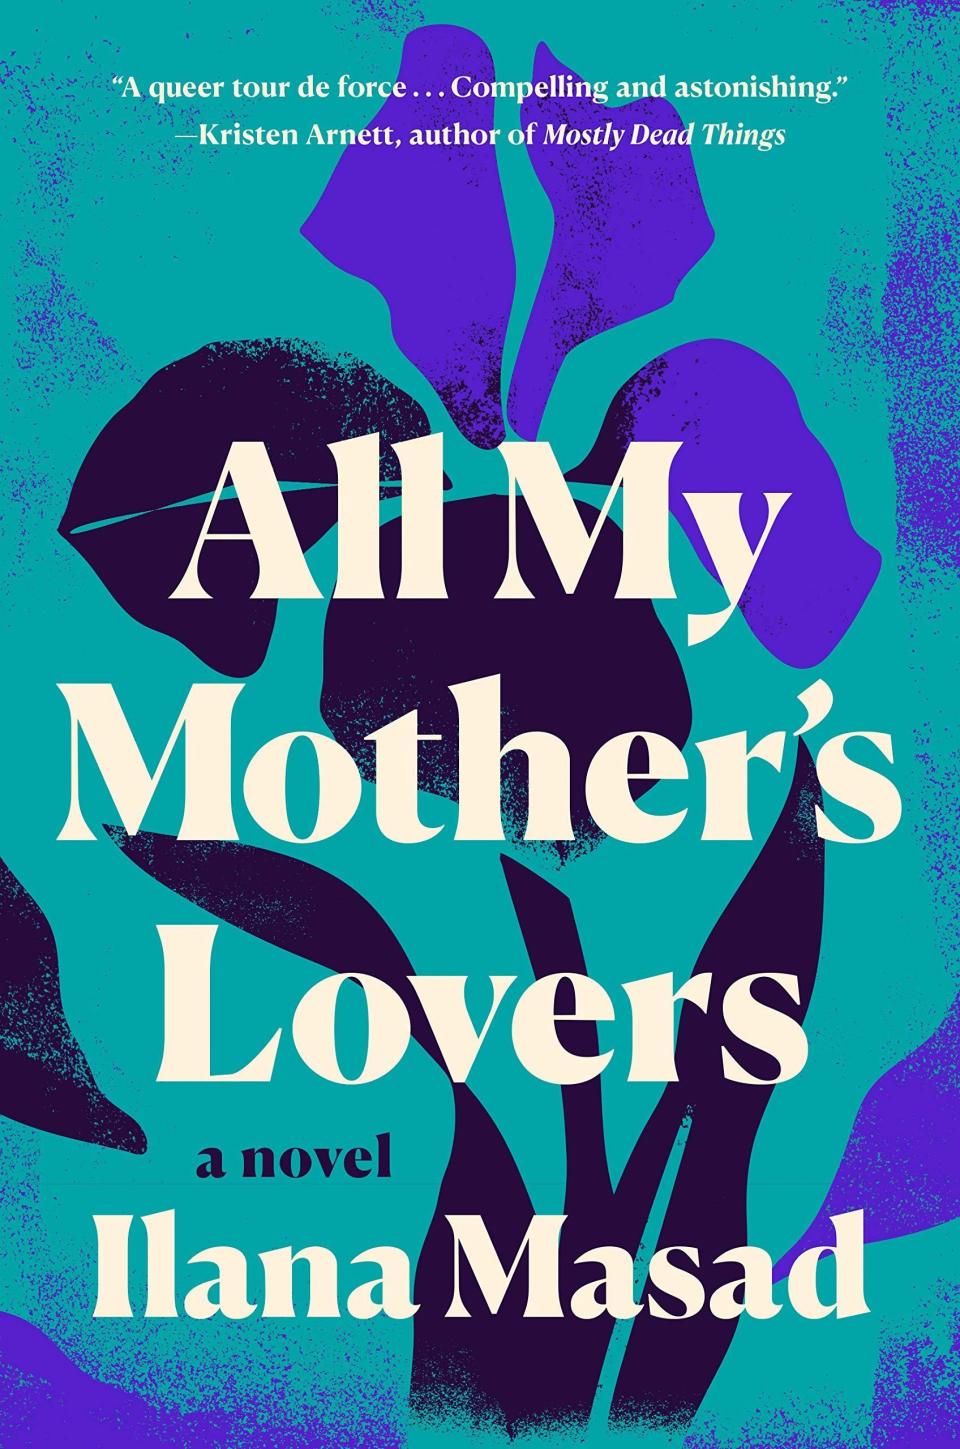 28) ‘All My Mother’s Lovers’ by Ilana Masad